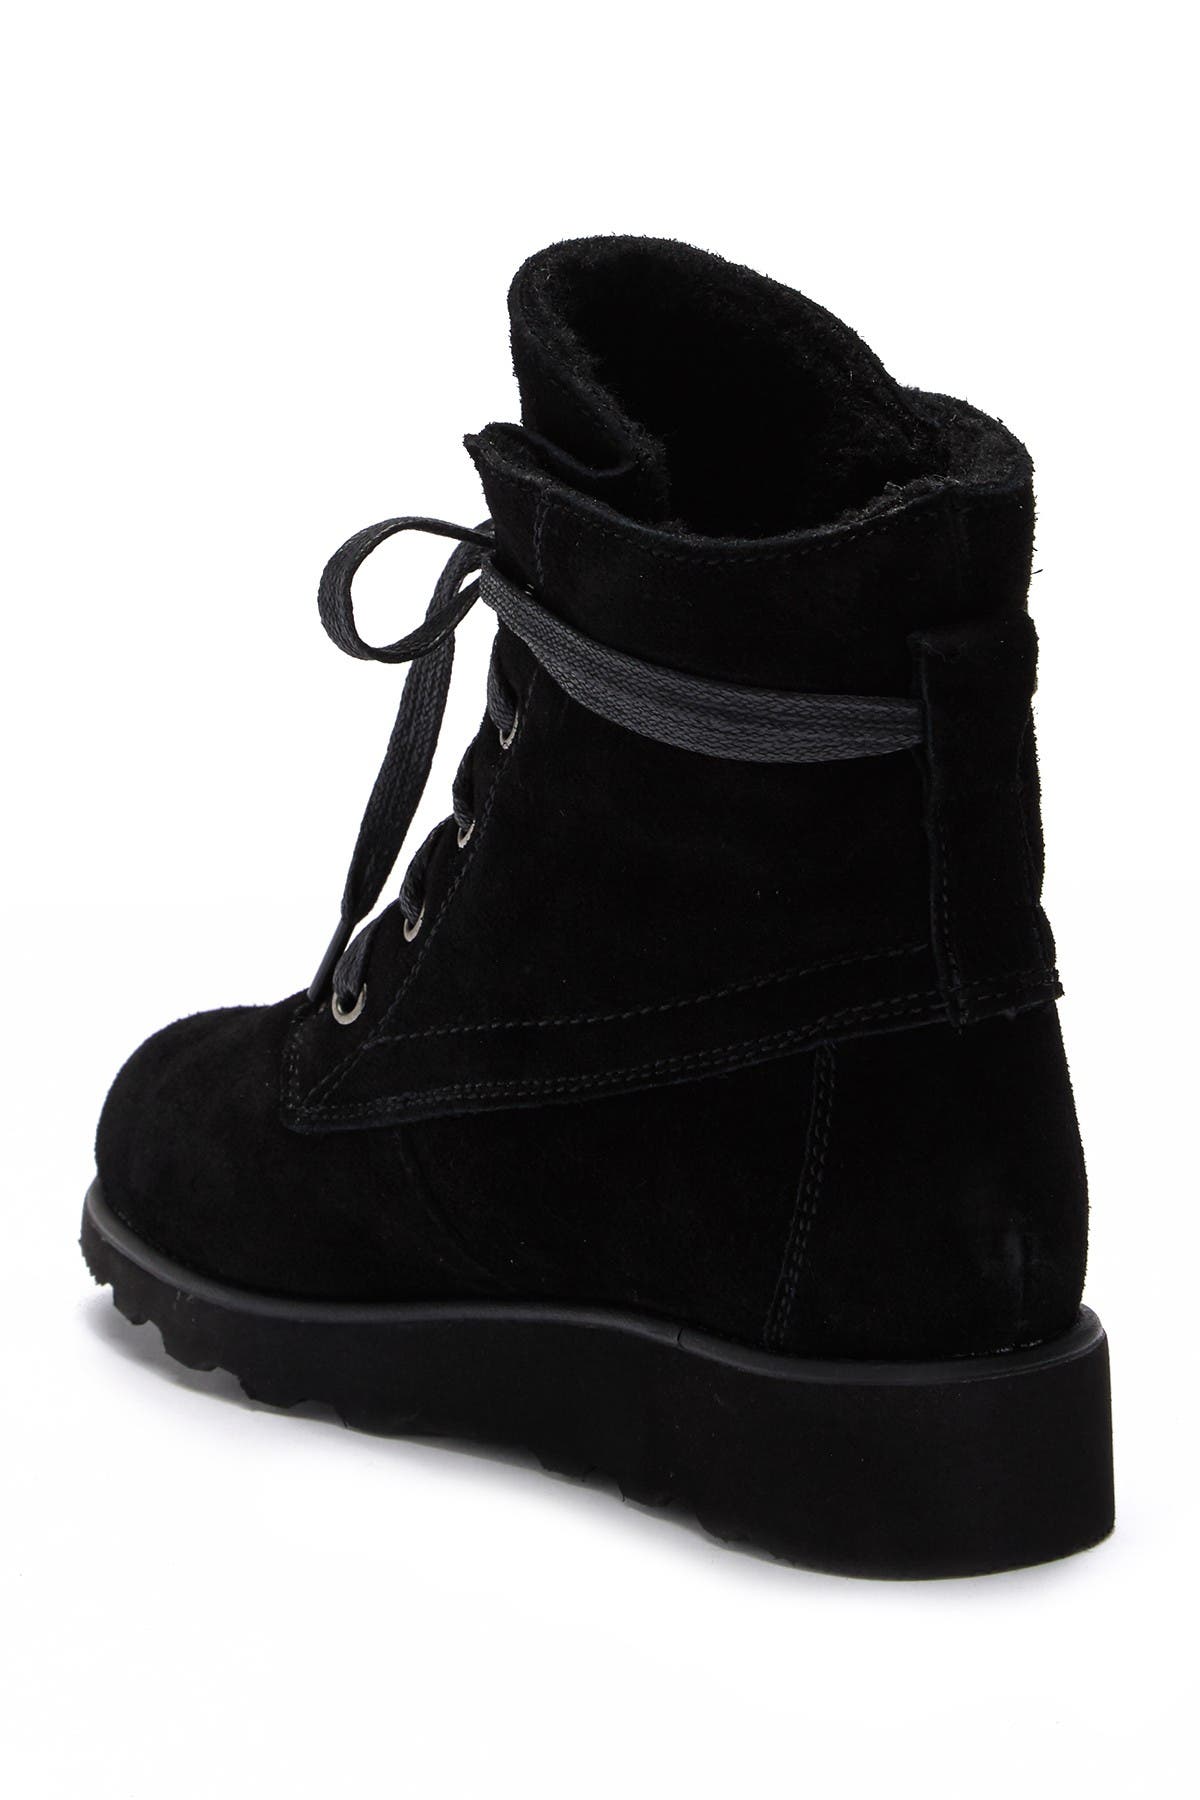 BEARPAW | Krista Youth Lace-Up Boot 